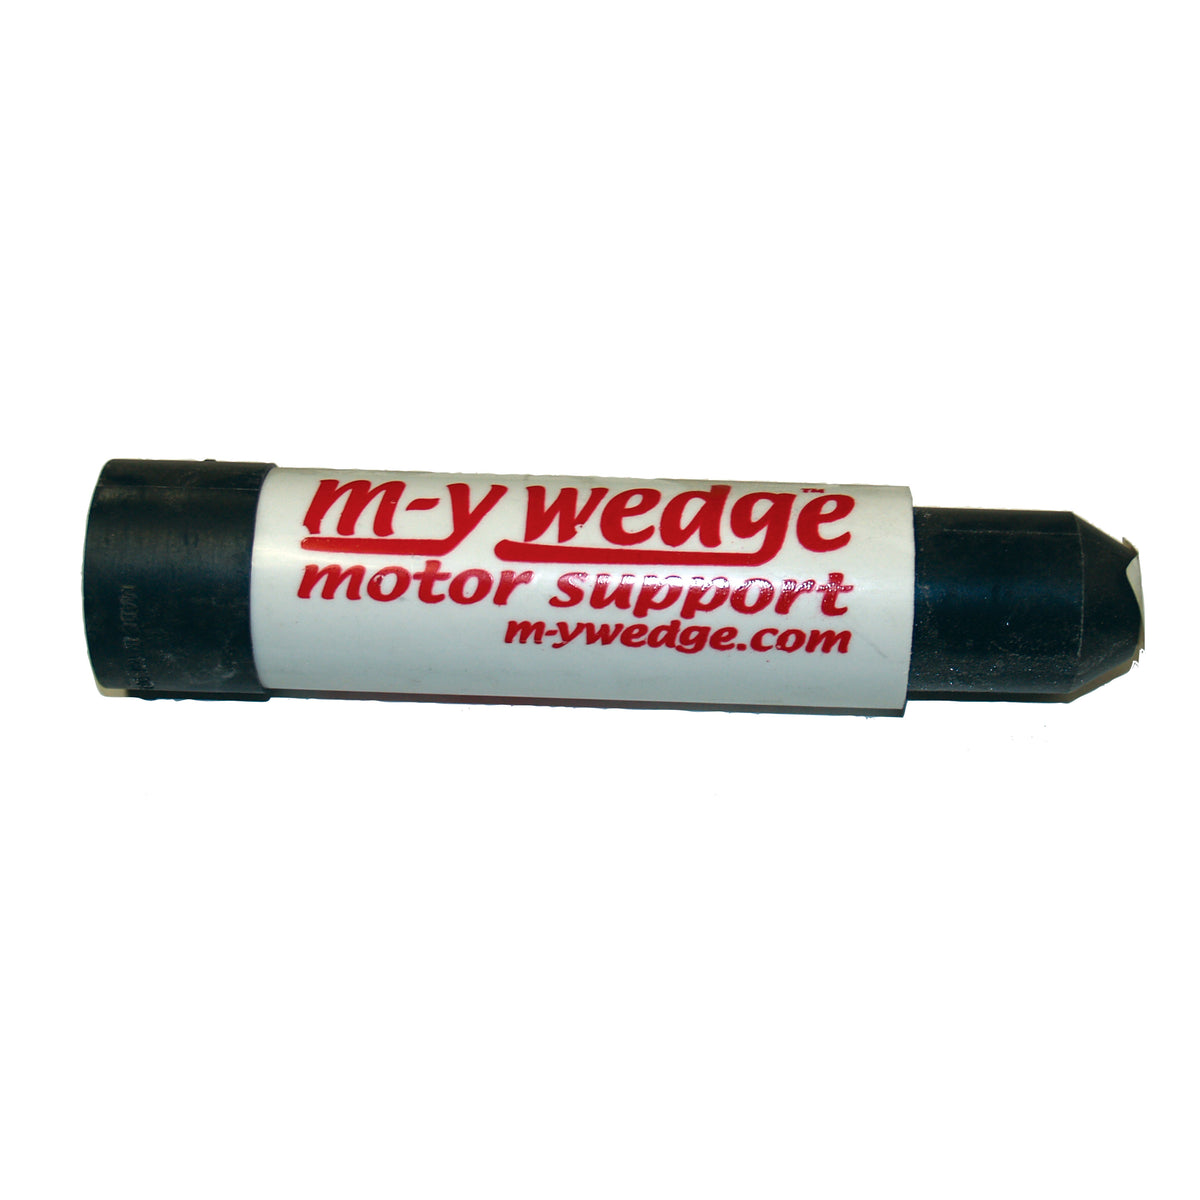 M-Y Wedge Motor Support - OMC